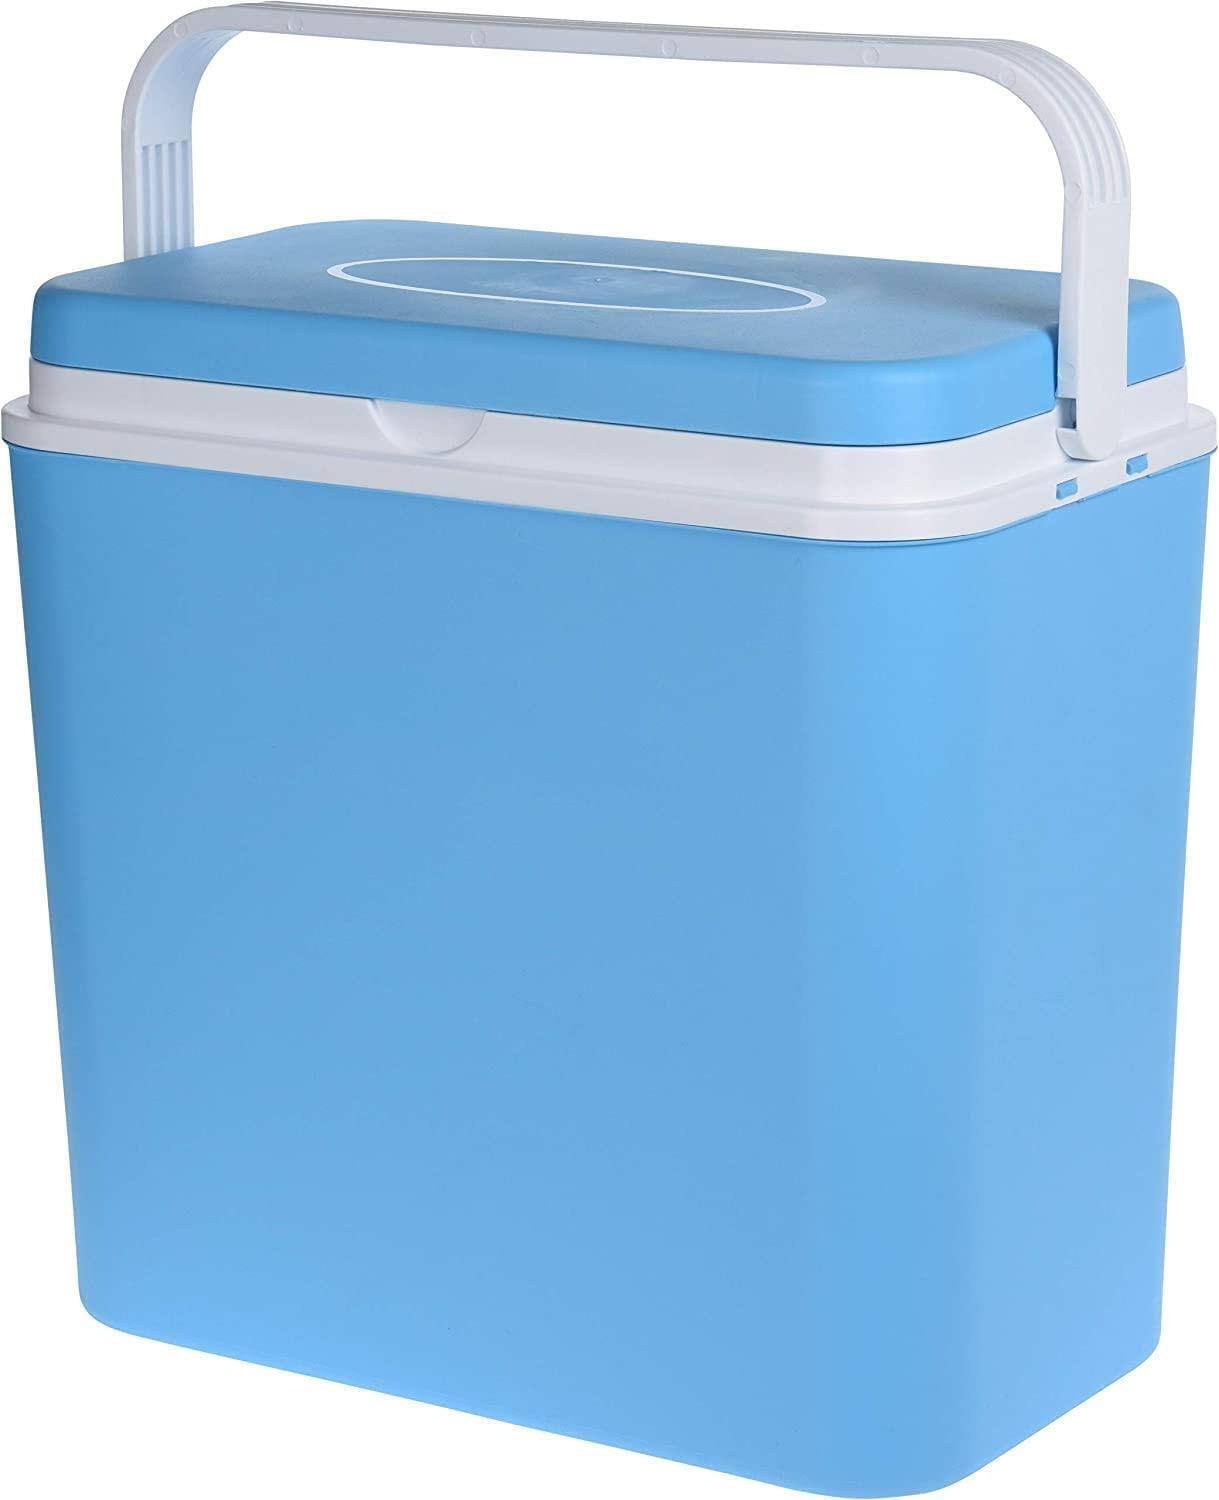 ADRIATIC Large 24 Litre Cooler Box Camping Beach Lunch Picnic Insulated Food 2 Ice Packs 